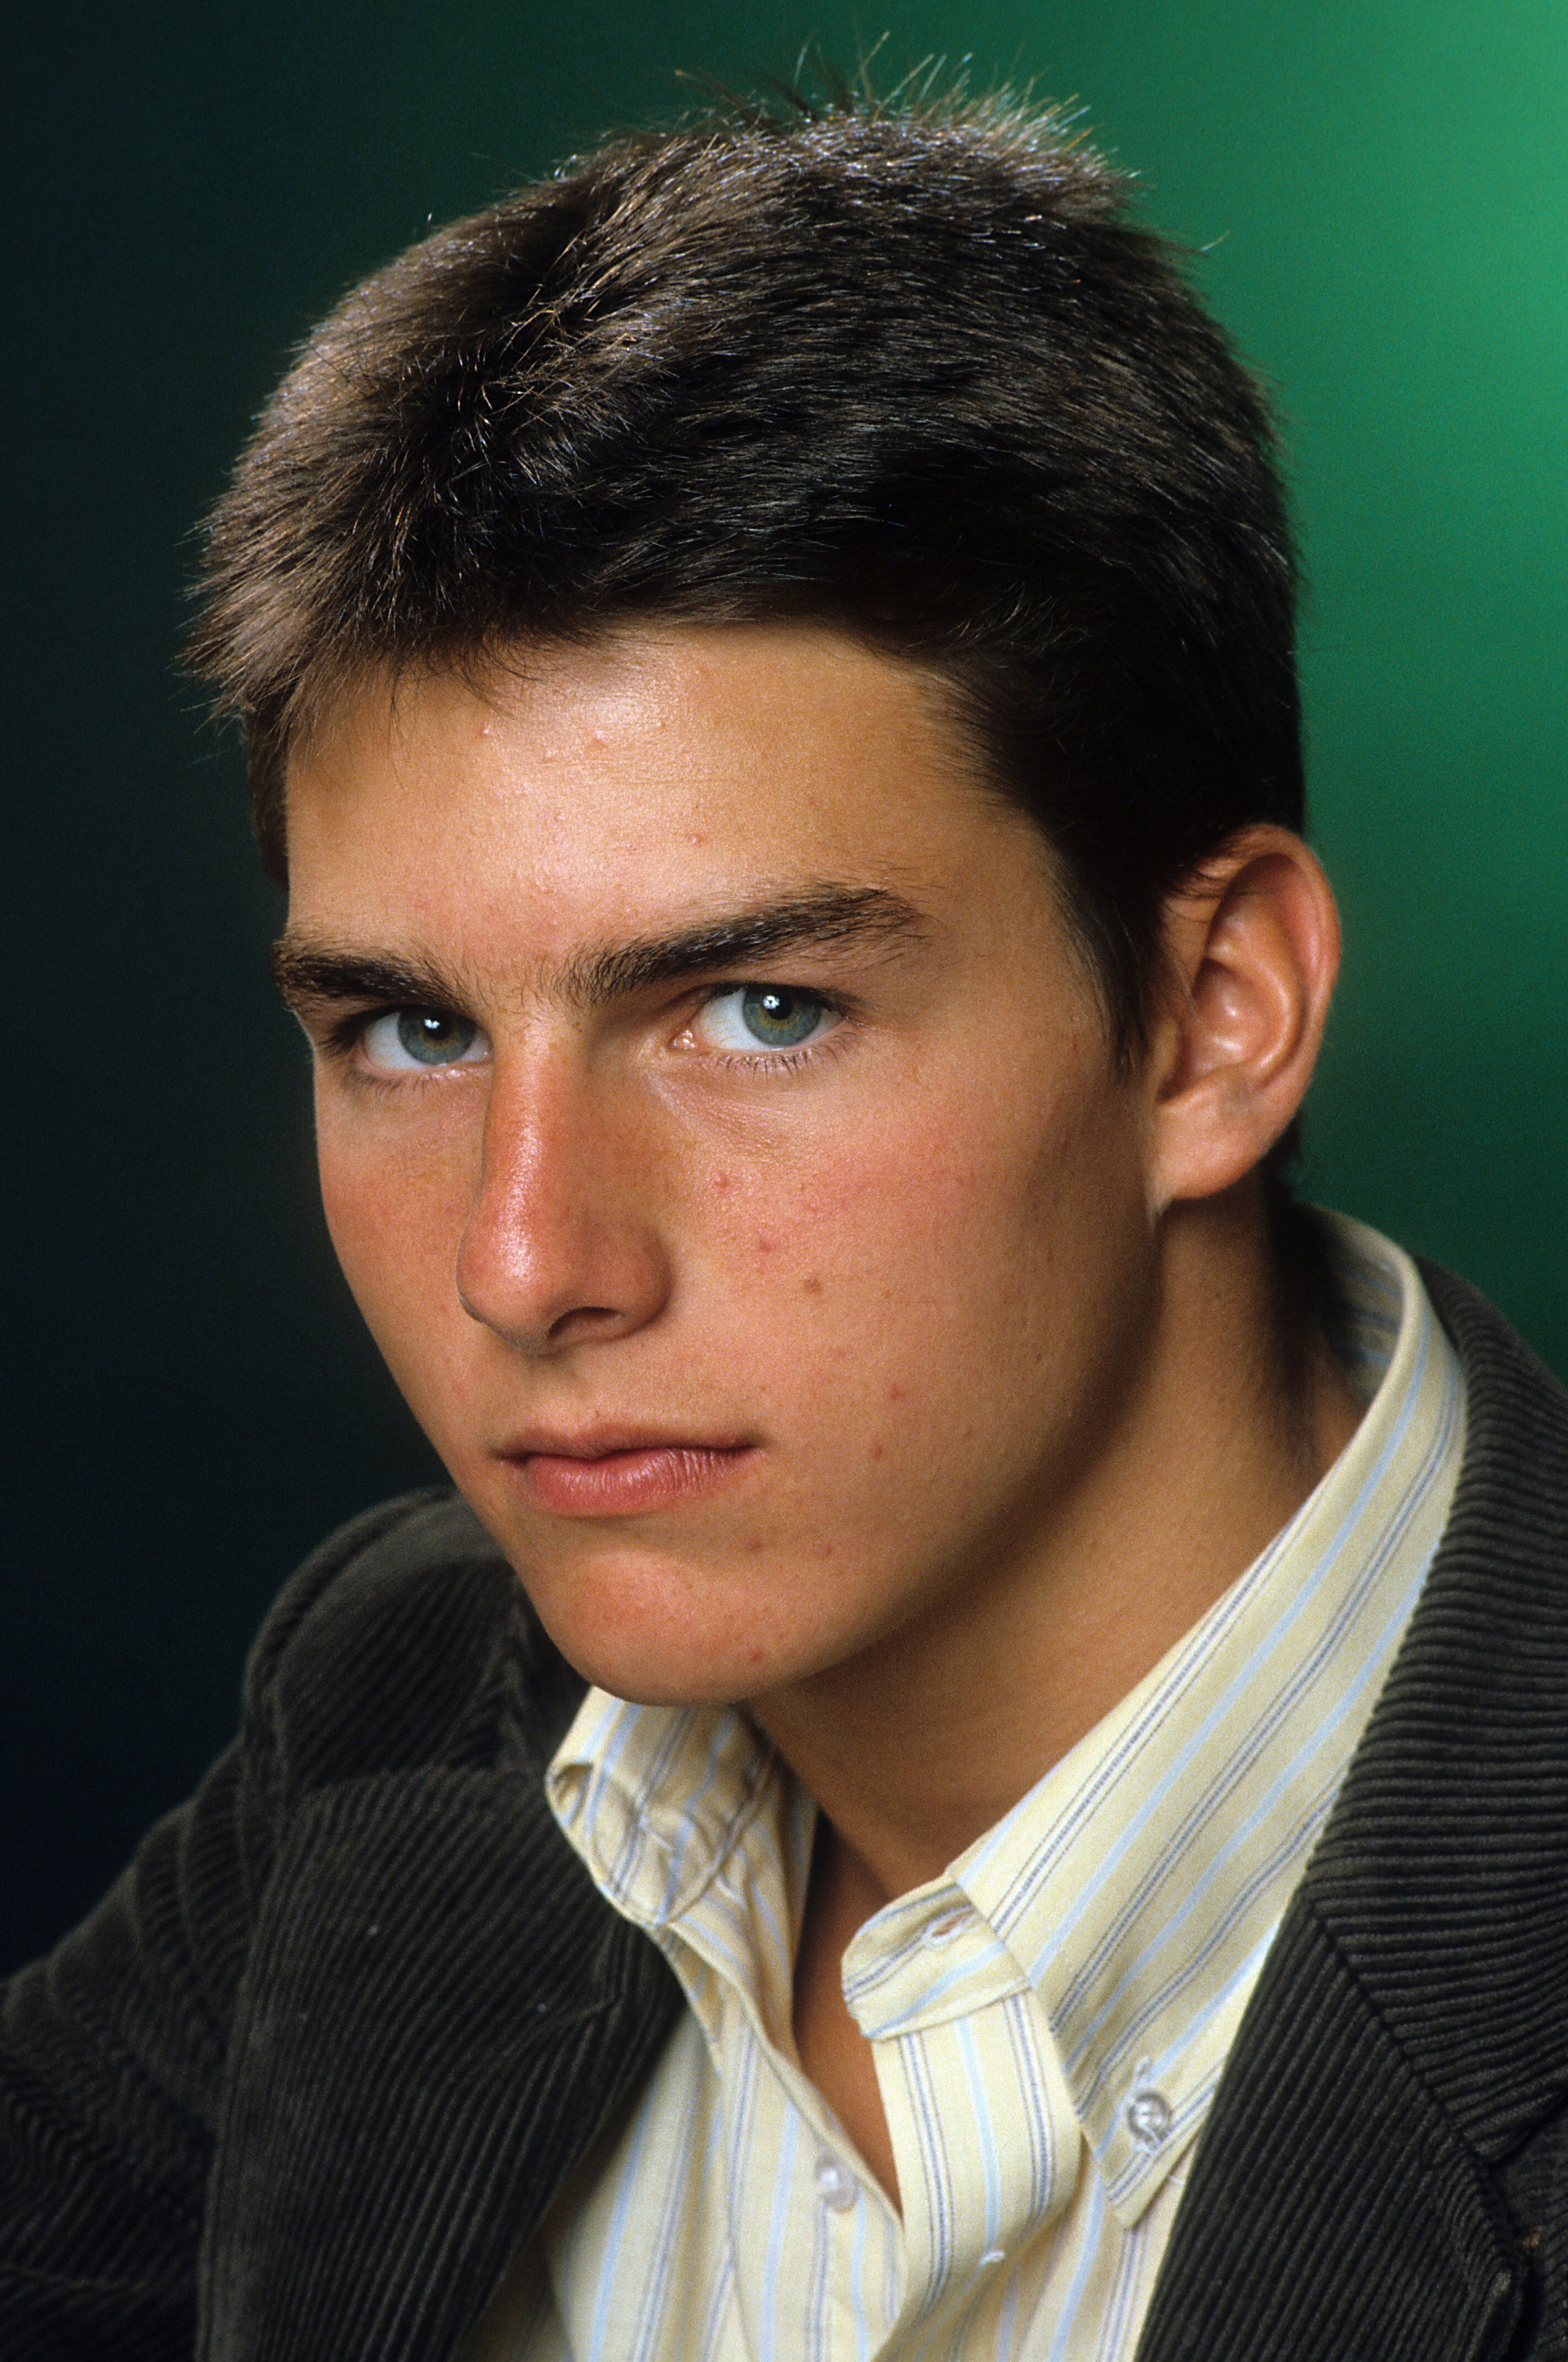 <p>Tom Cruise posed for this portrait in 1981 -- the same year he appeared in his first two films, "Endless Love" and "Taps."</p><p>MORE: <a href="https://www.wonderwall.com/celebrity/profiles/nicole-kidman-life-in-photos-20168.gallery">Nicole Kidman's life in photos</a></p>